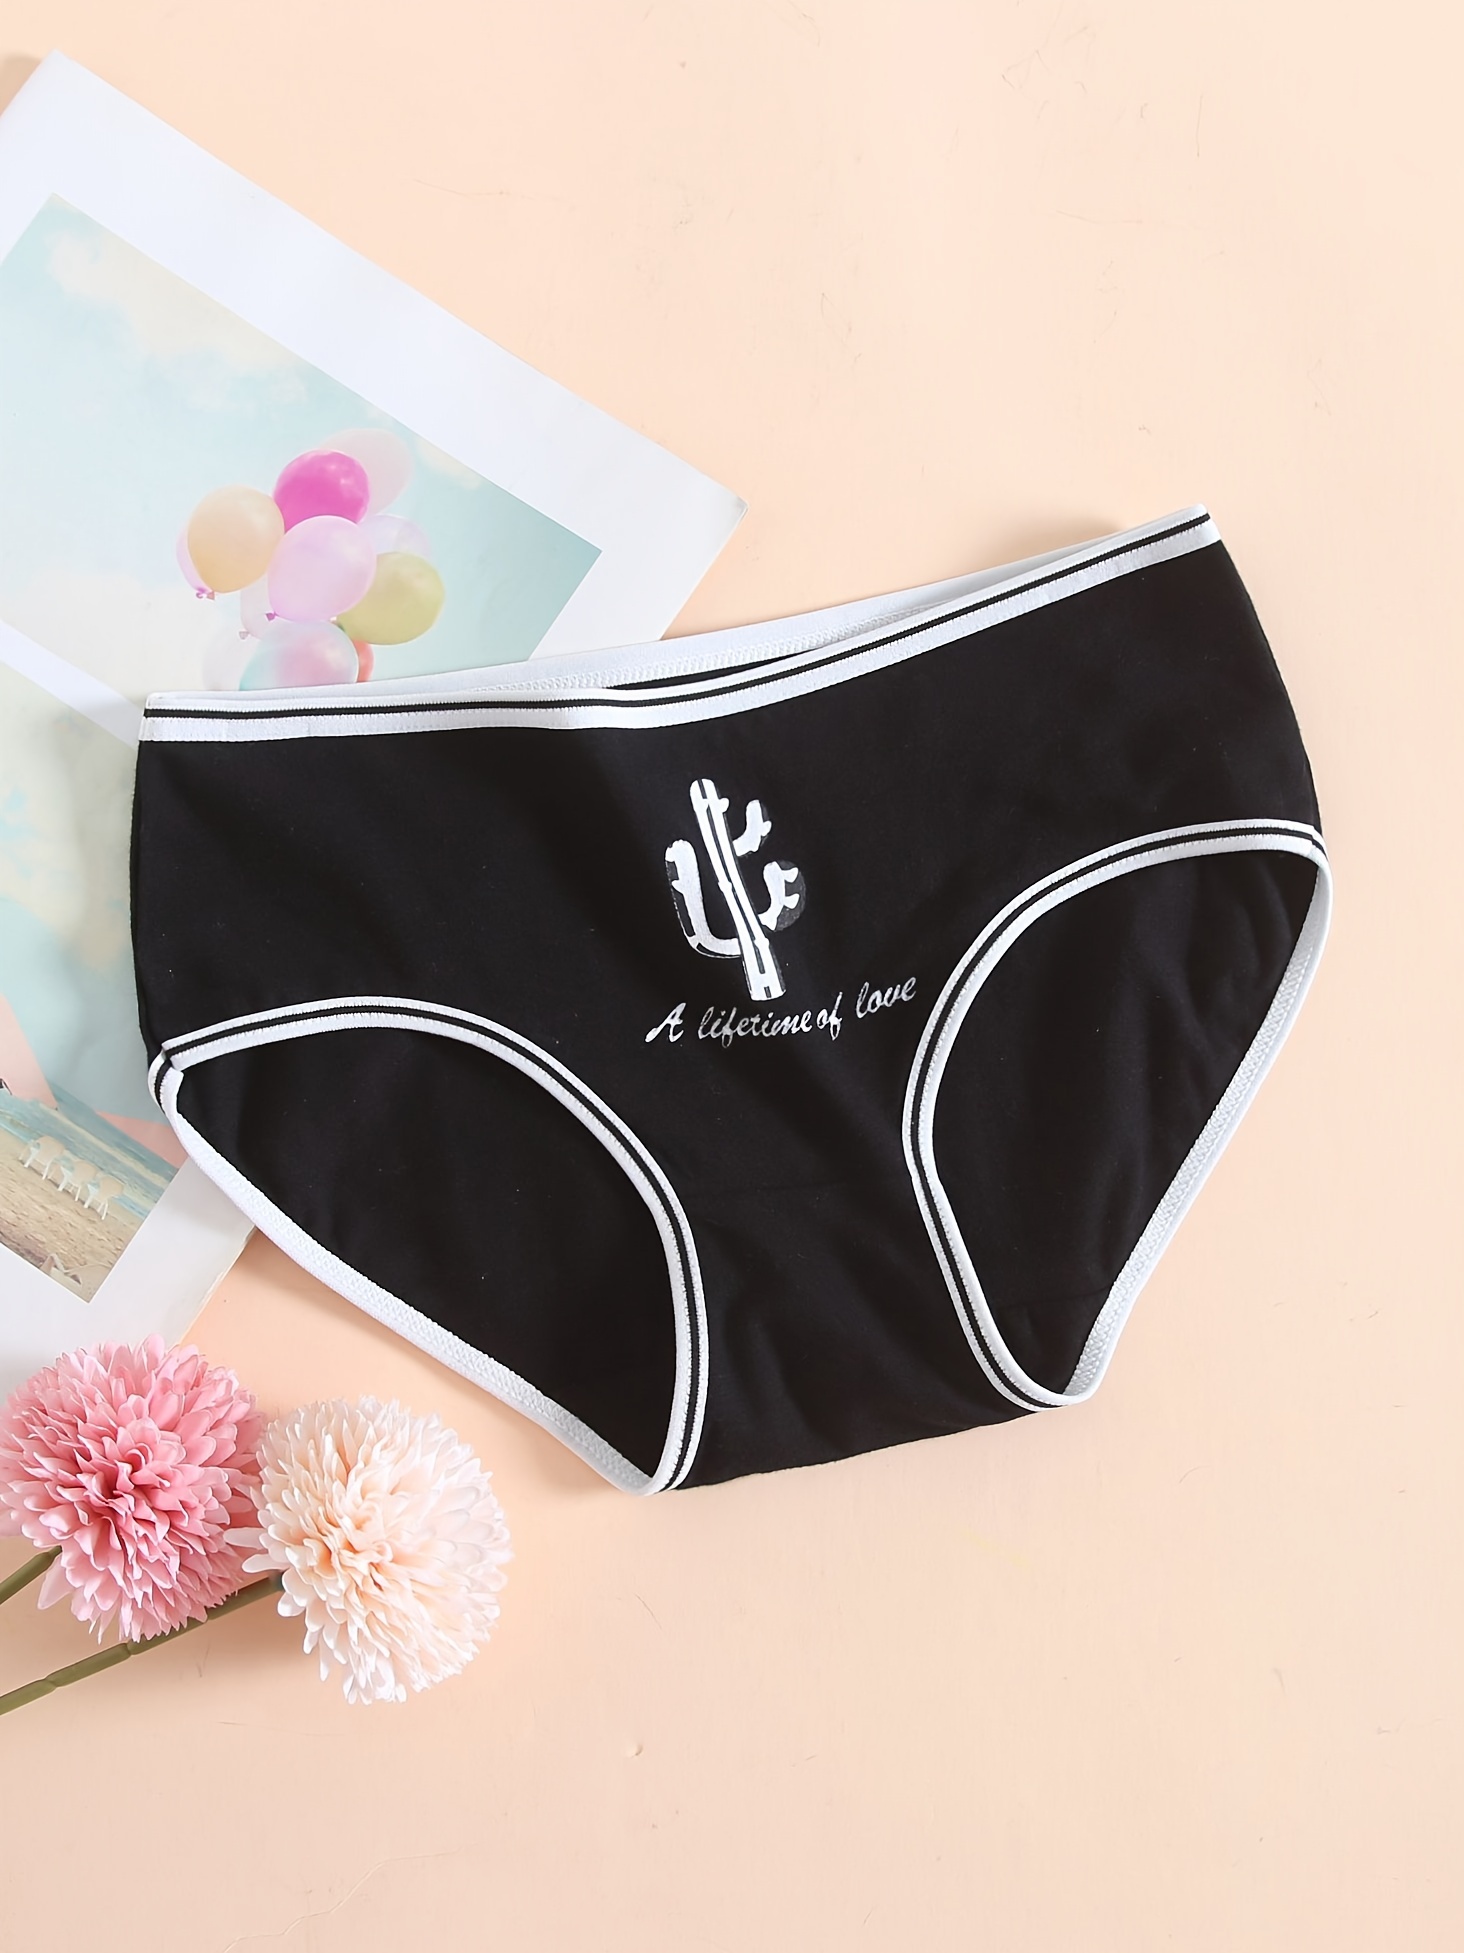 Sweet Lovely Girl's Black Underwear Soft Panty Briefs with Pink